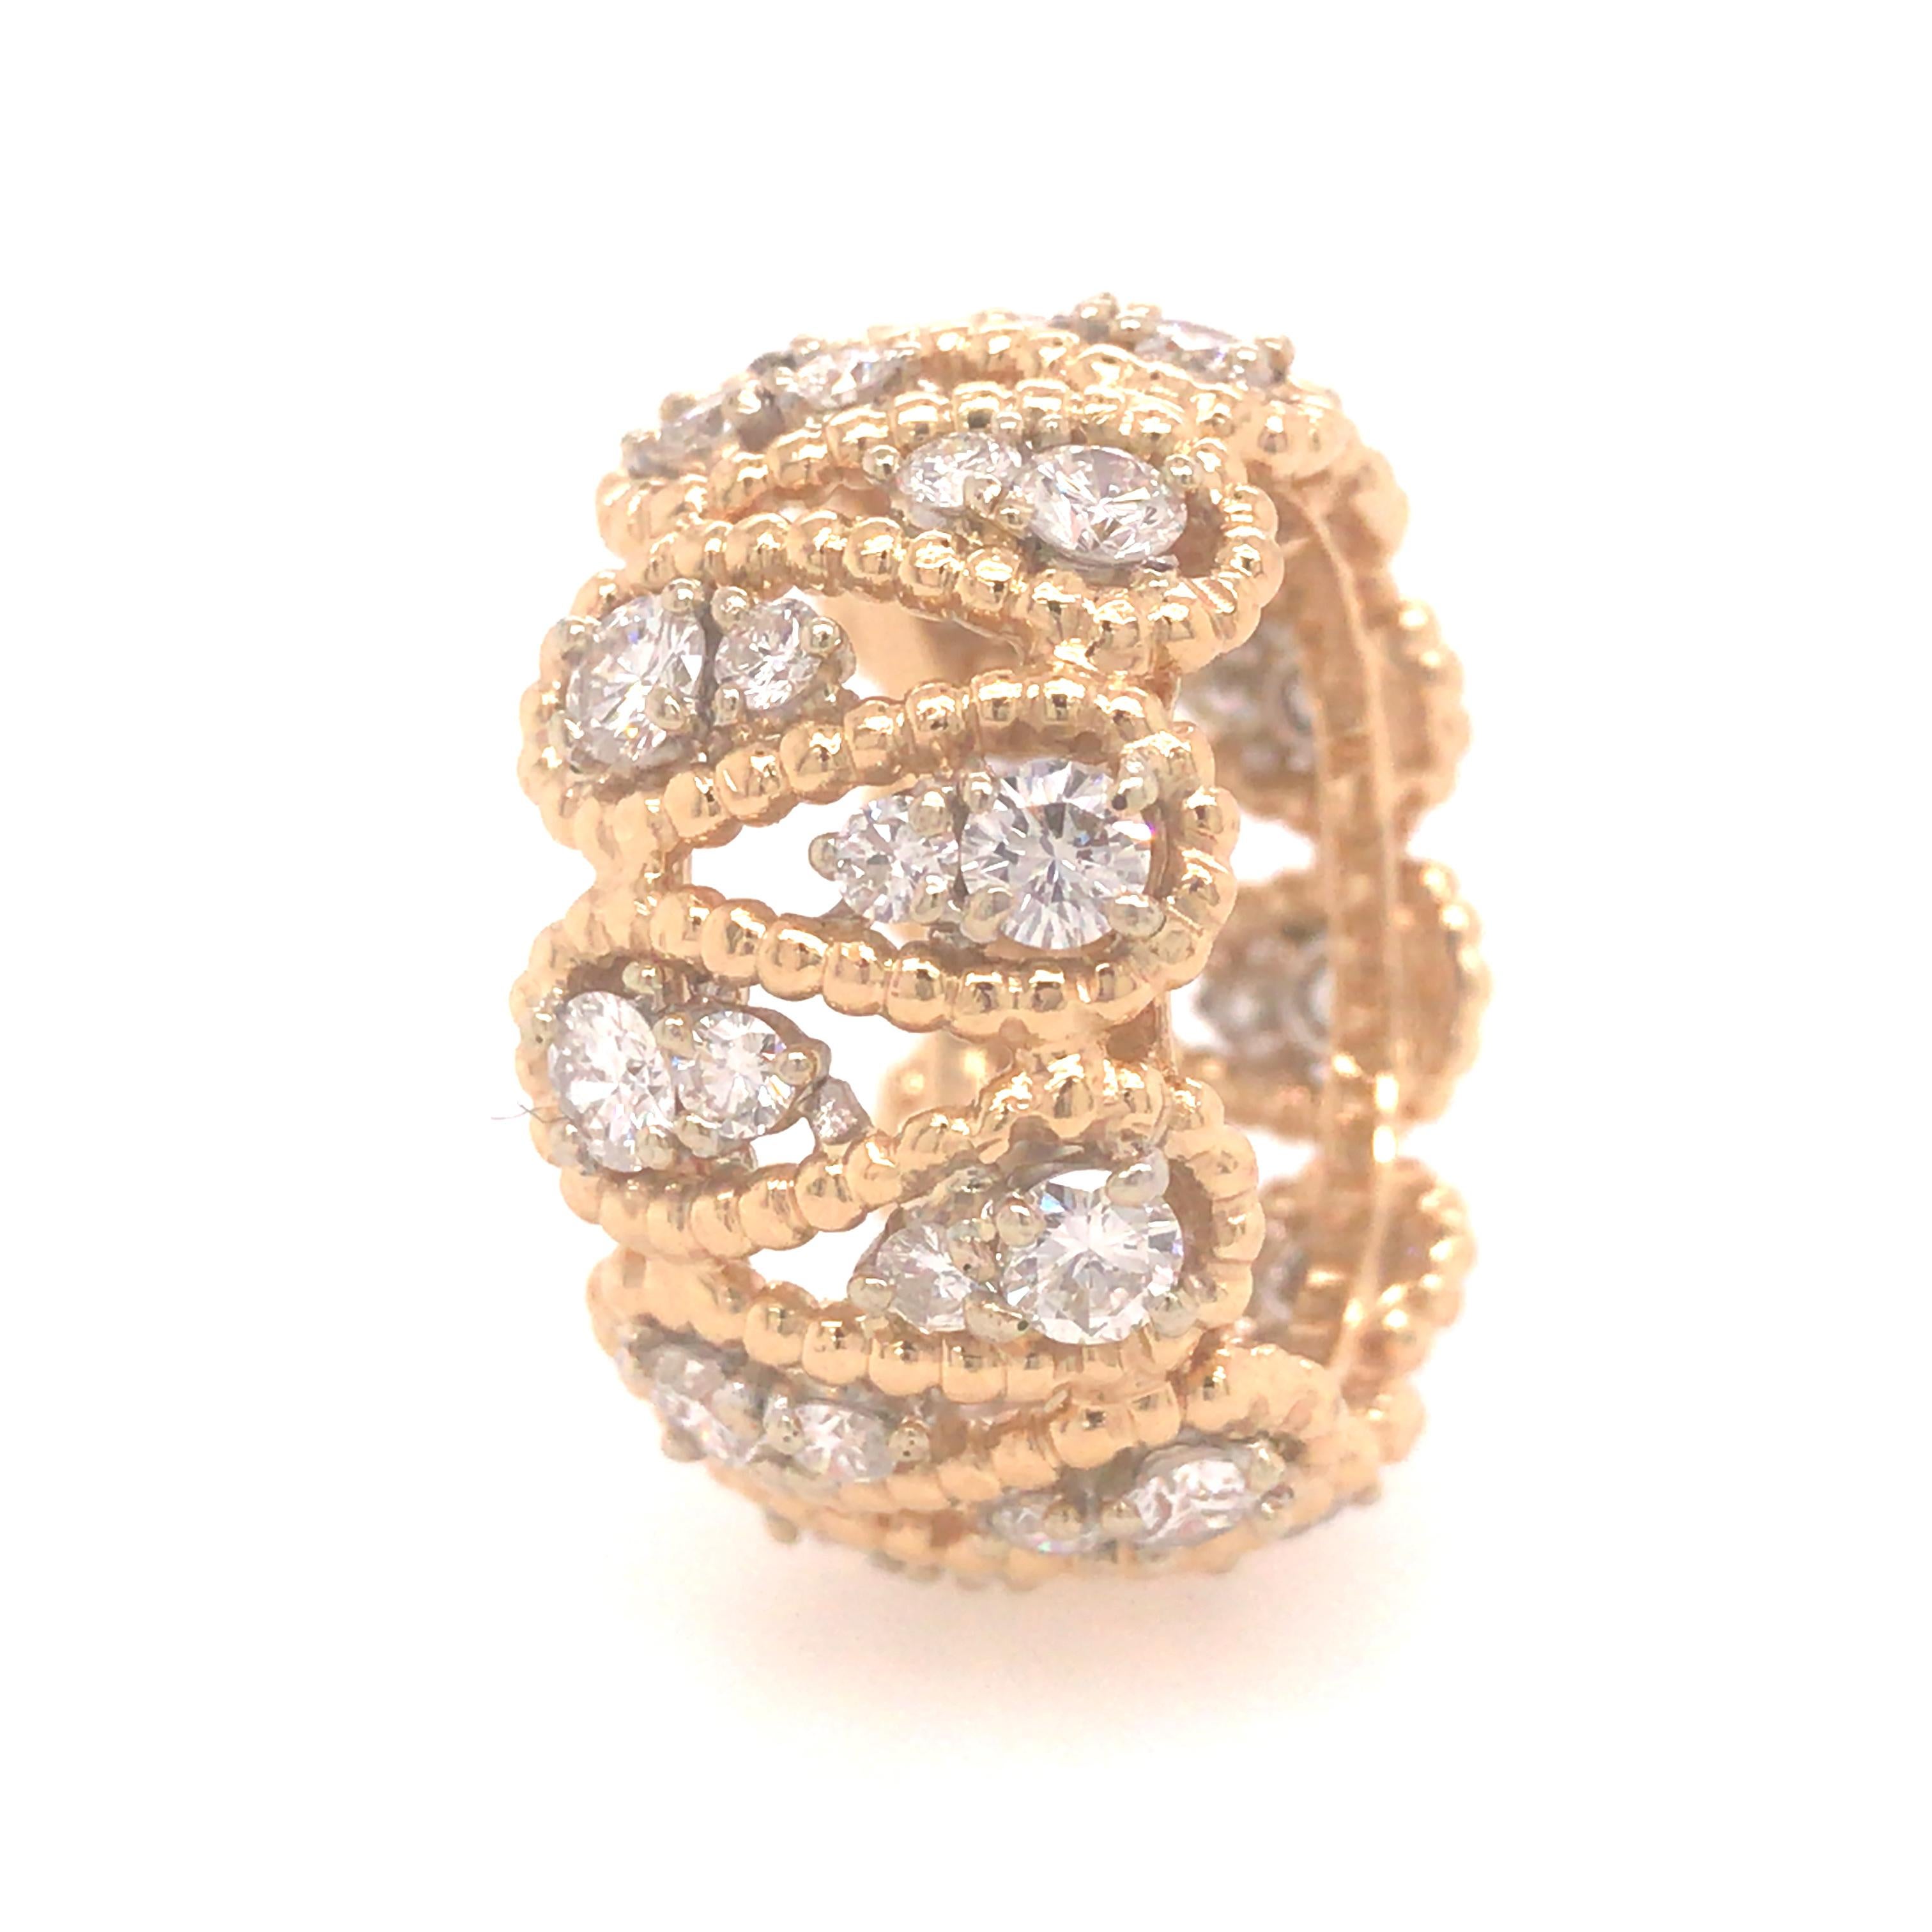 Tiffany & Co. Vintage Diamond Eternity Band in 18K Two-Tone Gold.  Round Brilliant Cut Diamonds weighing 3.30 carat total weight, F-G in color and VS in clarity are expertly set.  Ring size 6.  Stamped 